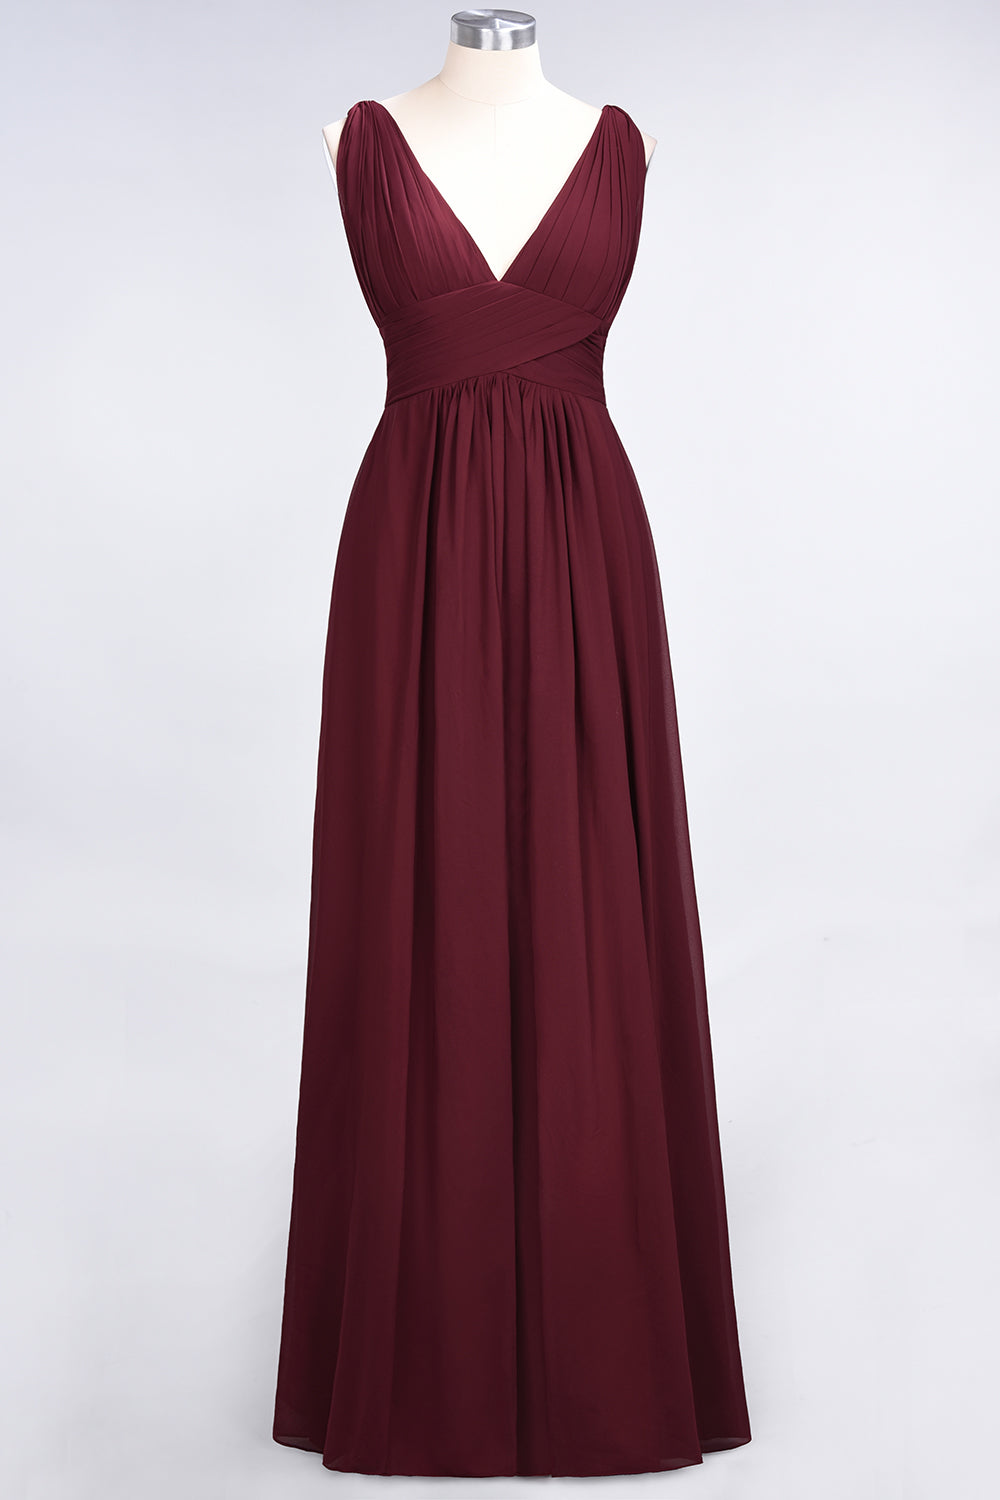 Load image into Gallery viewer, Burgundy A-Line Chiffon V-Neck Long Bridesmaid Dress with Ruffle-BIZTUNNEL
